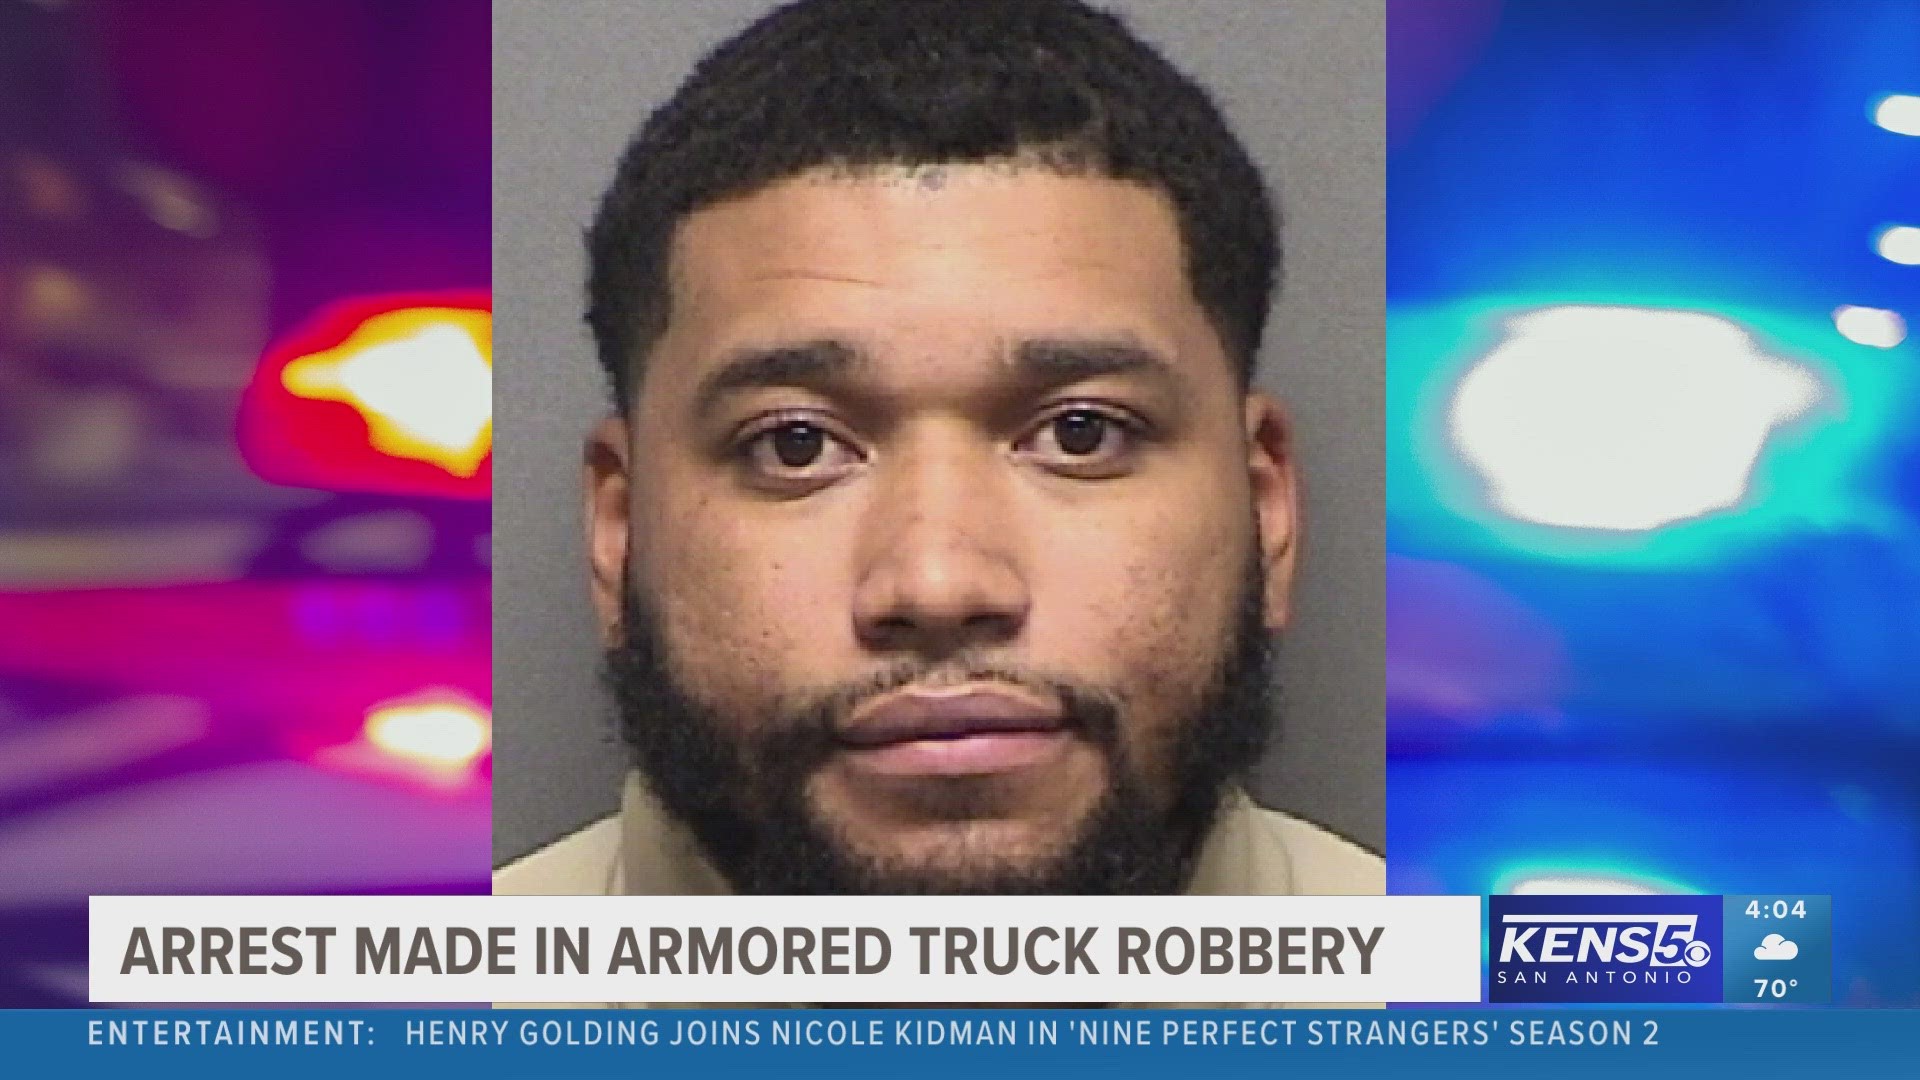 Deandre Dayshawn Nelson, 28, is facing aggravated robbery charges after police say he and another suspect were involved in a violent robbery of an armored truck.